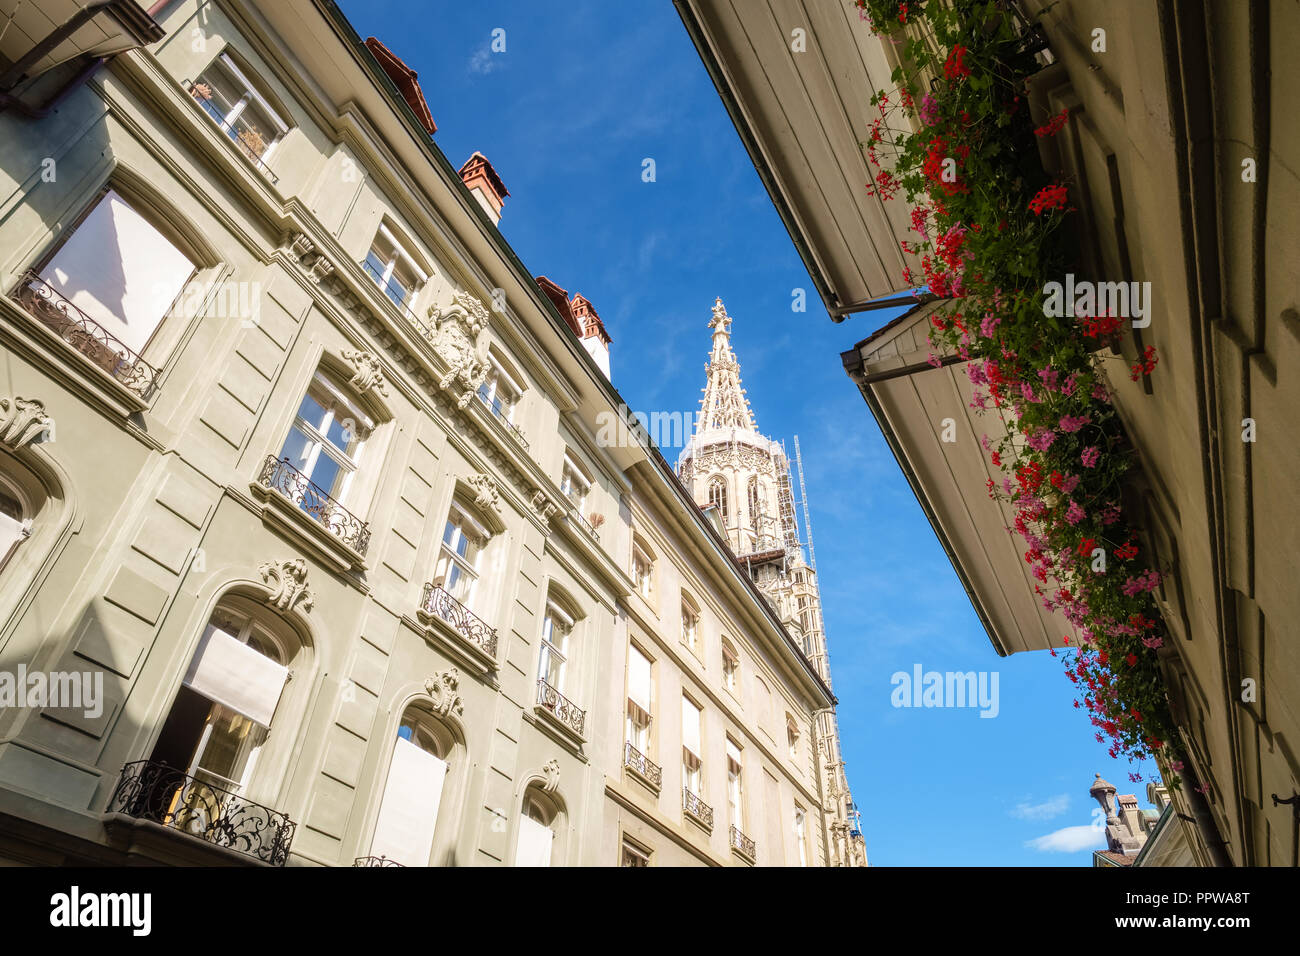 Bern, Switzerland - September 16, 2015: The famous Munster Cathedral towering over streets and houses in Bern. It is the highest tower of Switzerland Stock Photo